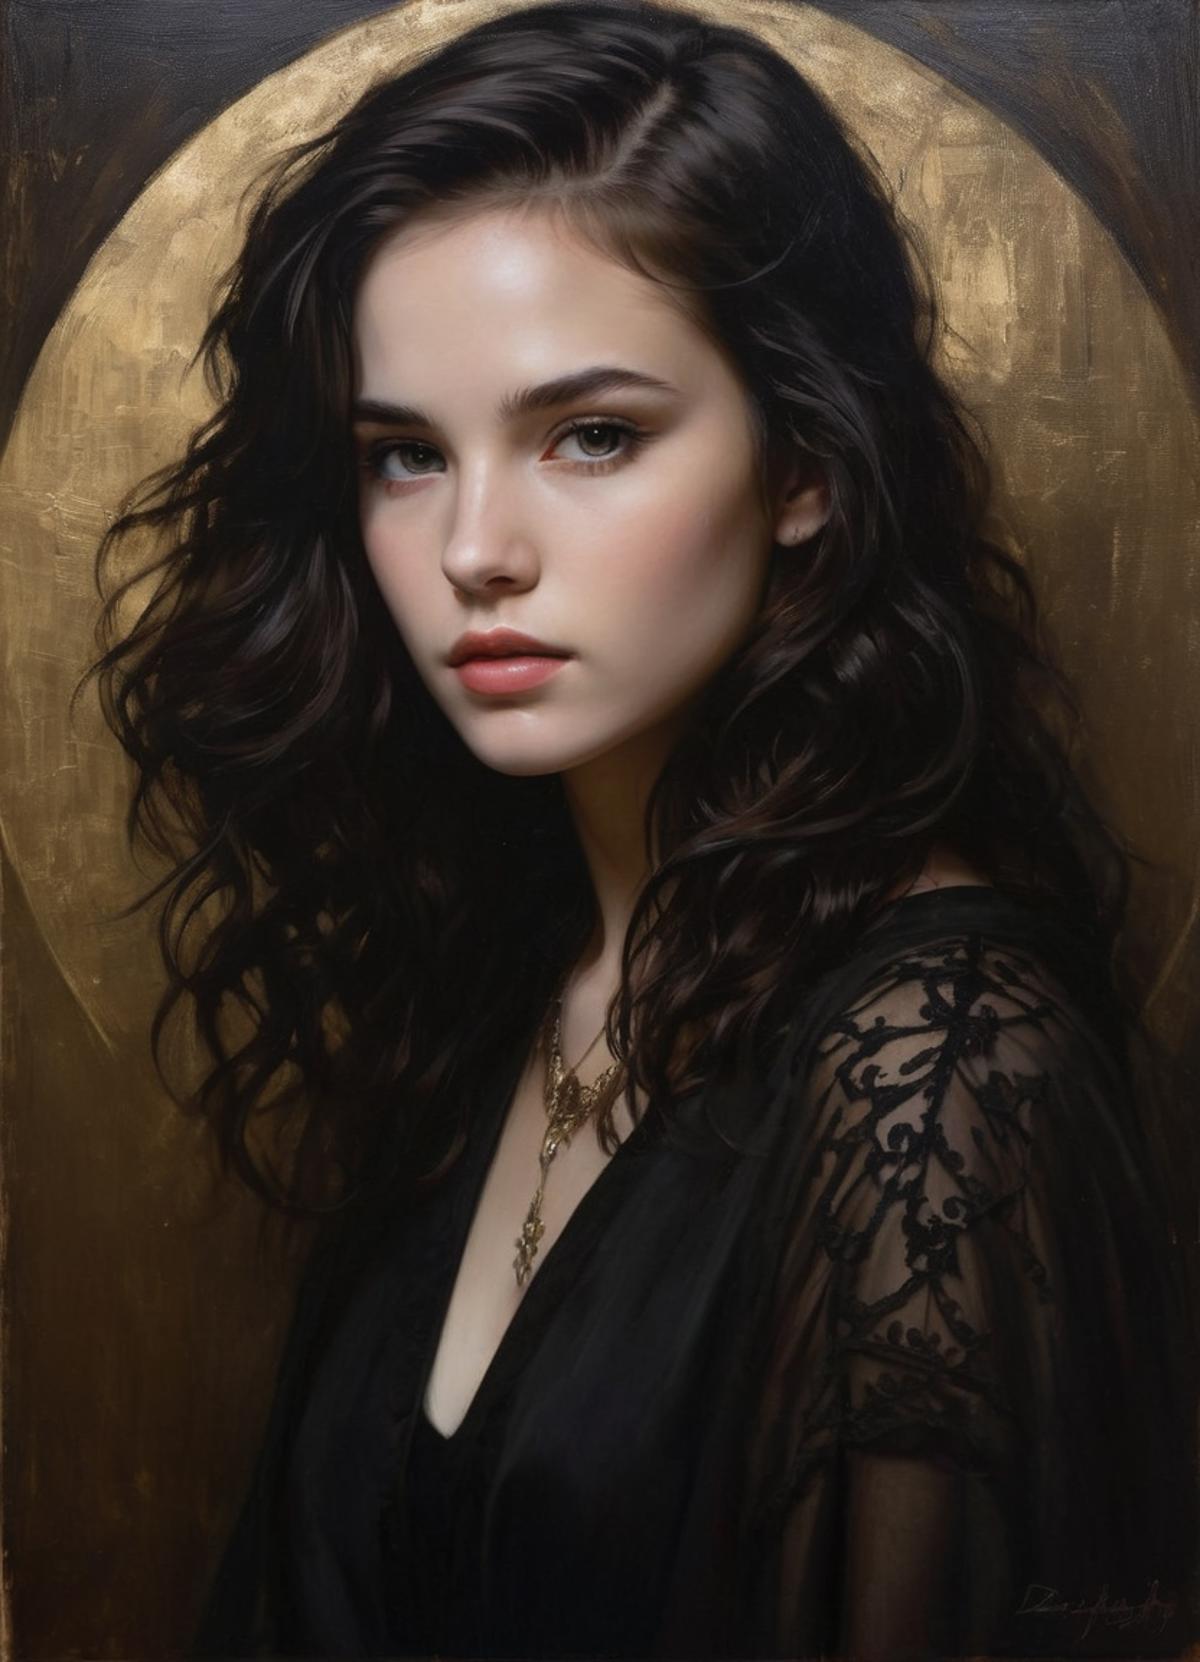 A portrait of a woman with long dark hair, wearing a black dress, and a gold chain.